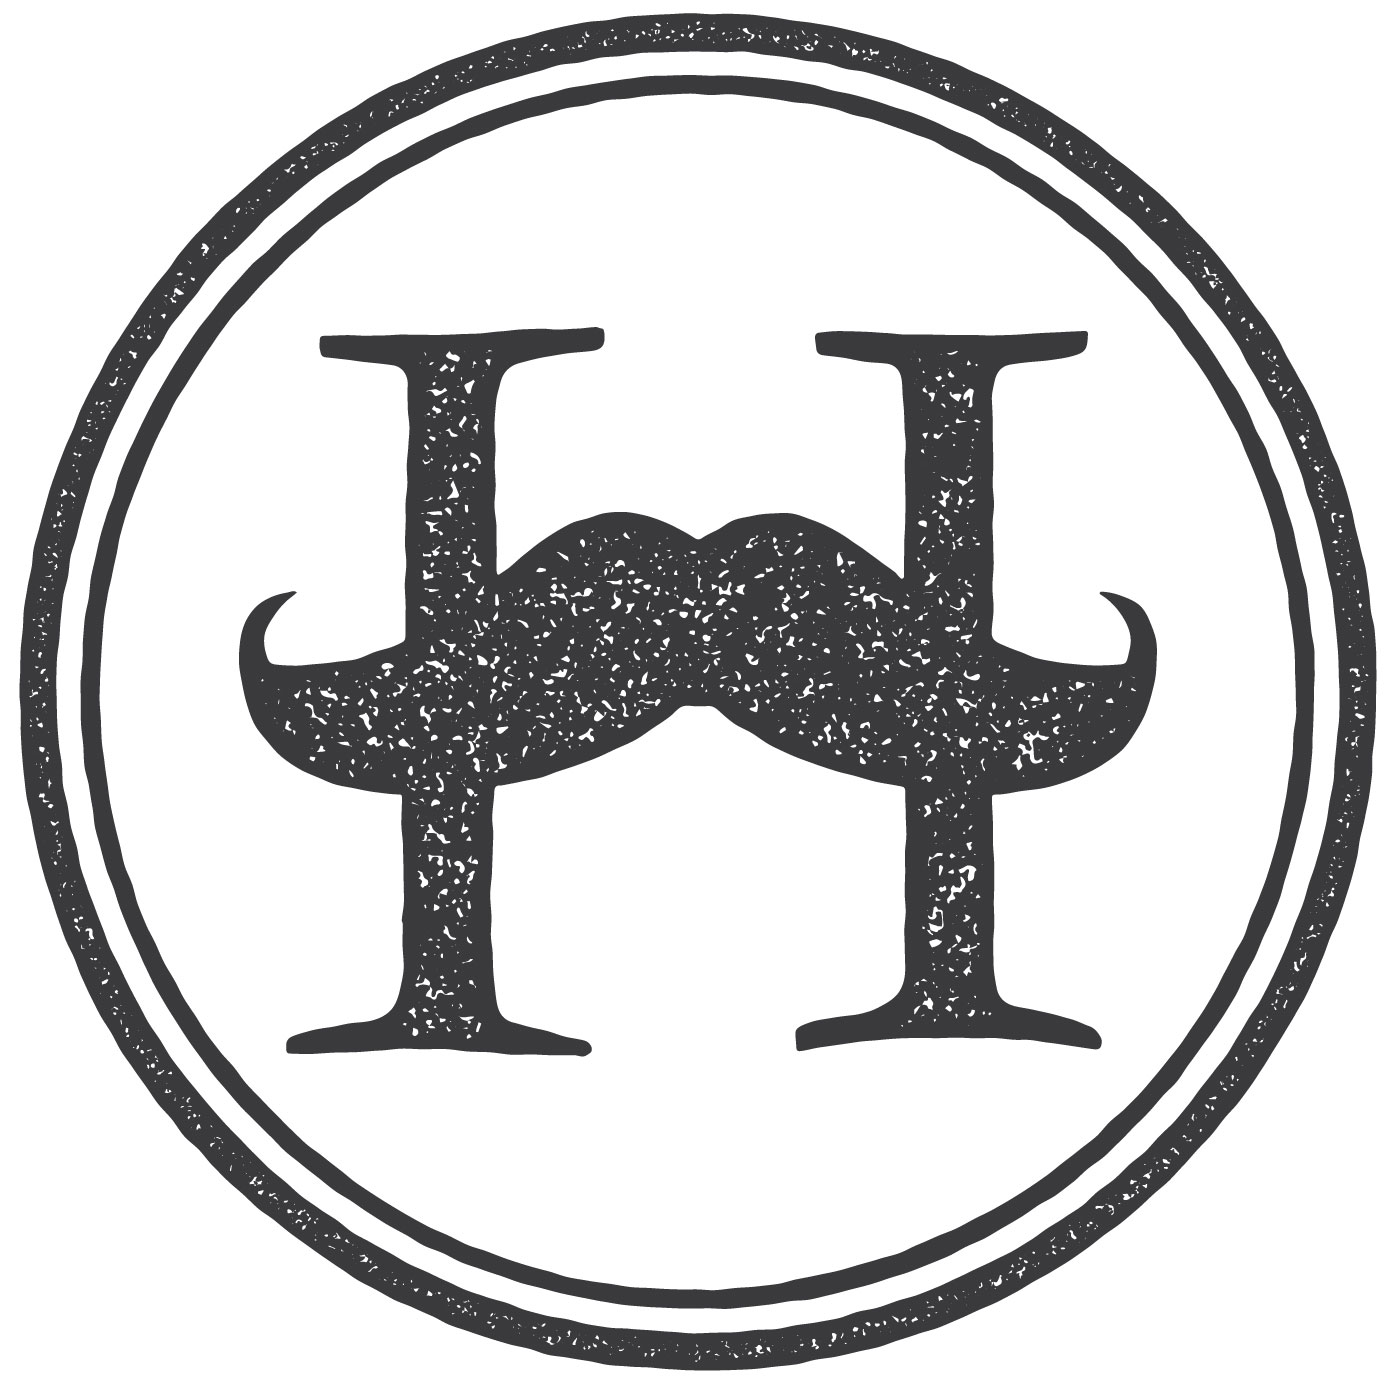 Hipster for Hire LLC